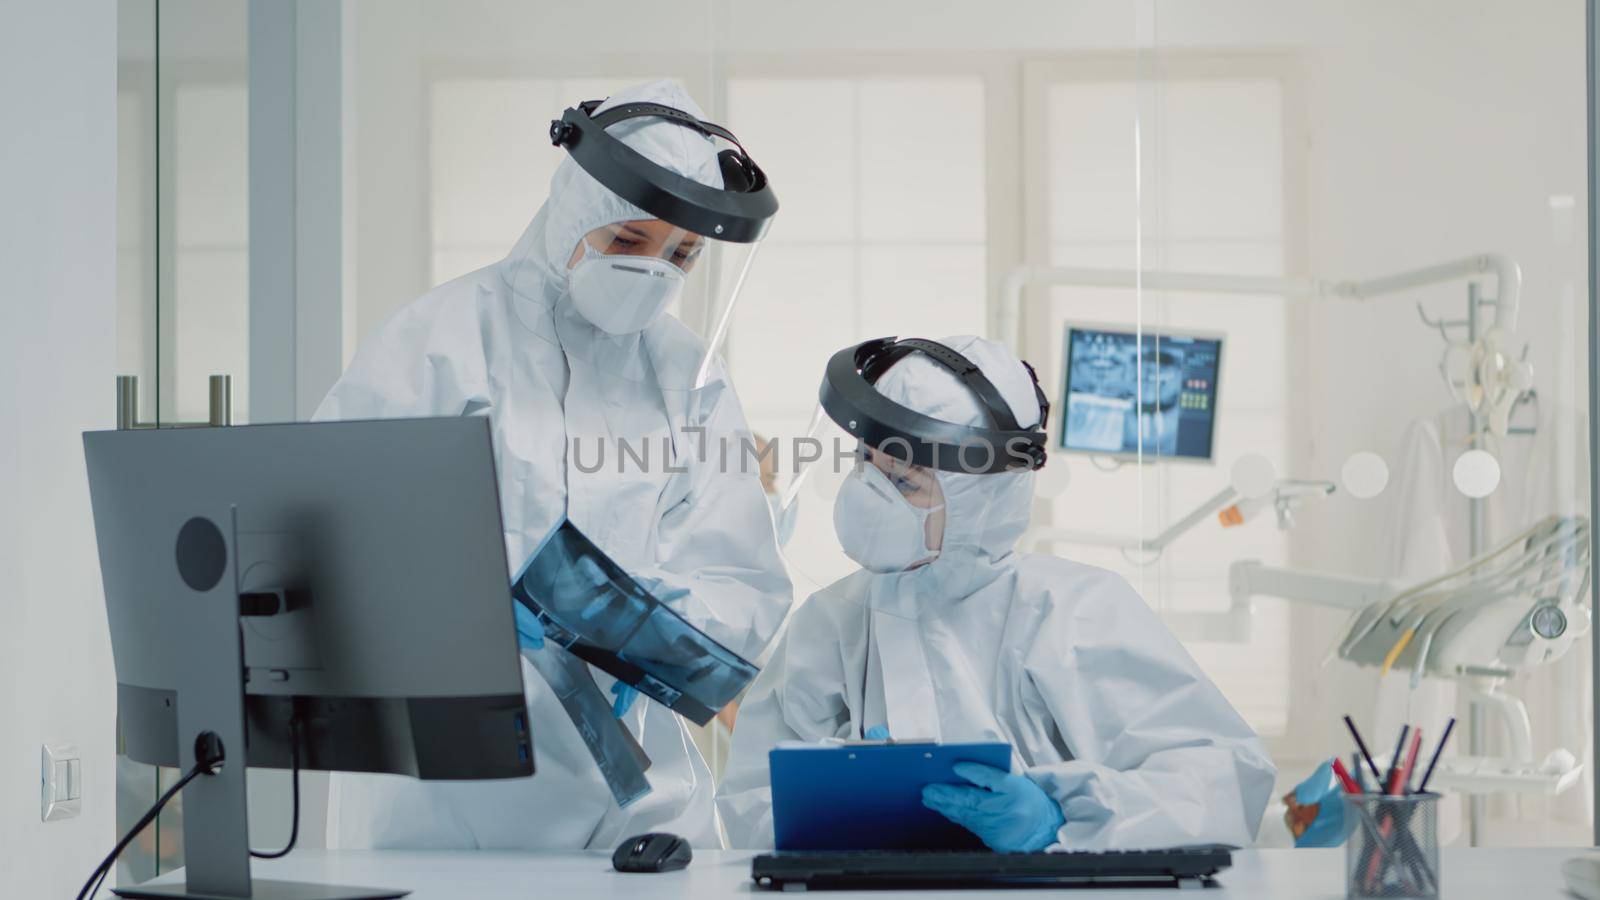 Professional dentist and assistant examining x ray of teeth while sitting in dental cabinet, during pandemic. Team of orthodontists looking at radiography scan for patient oral care